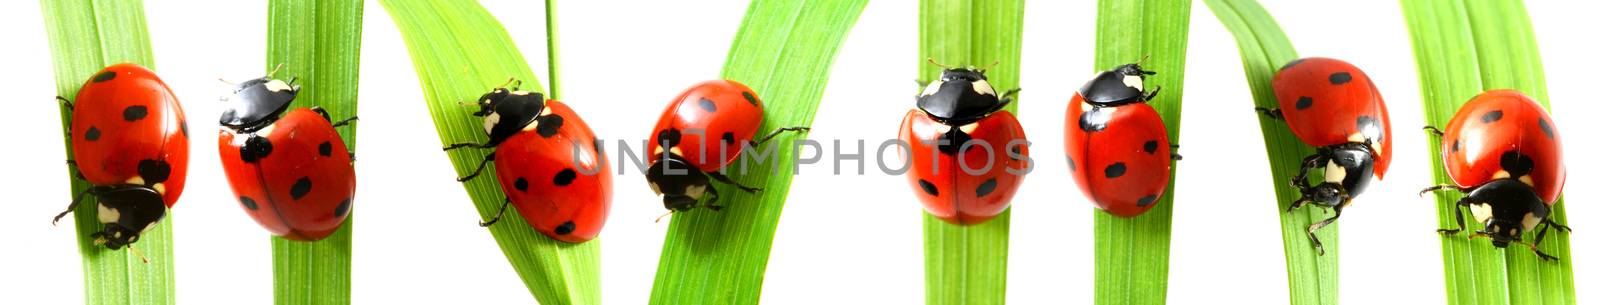 red ladybug on green grass isolated on white background set of pictures